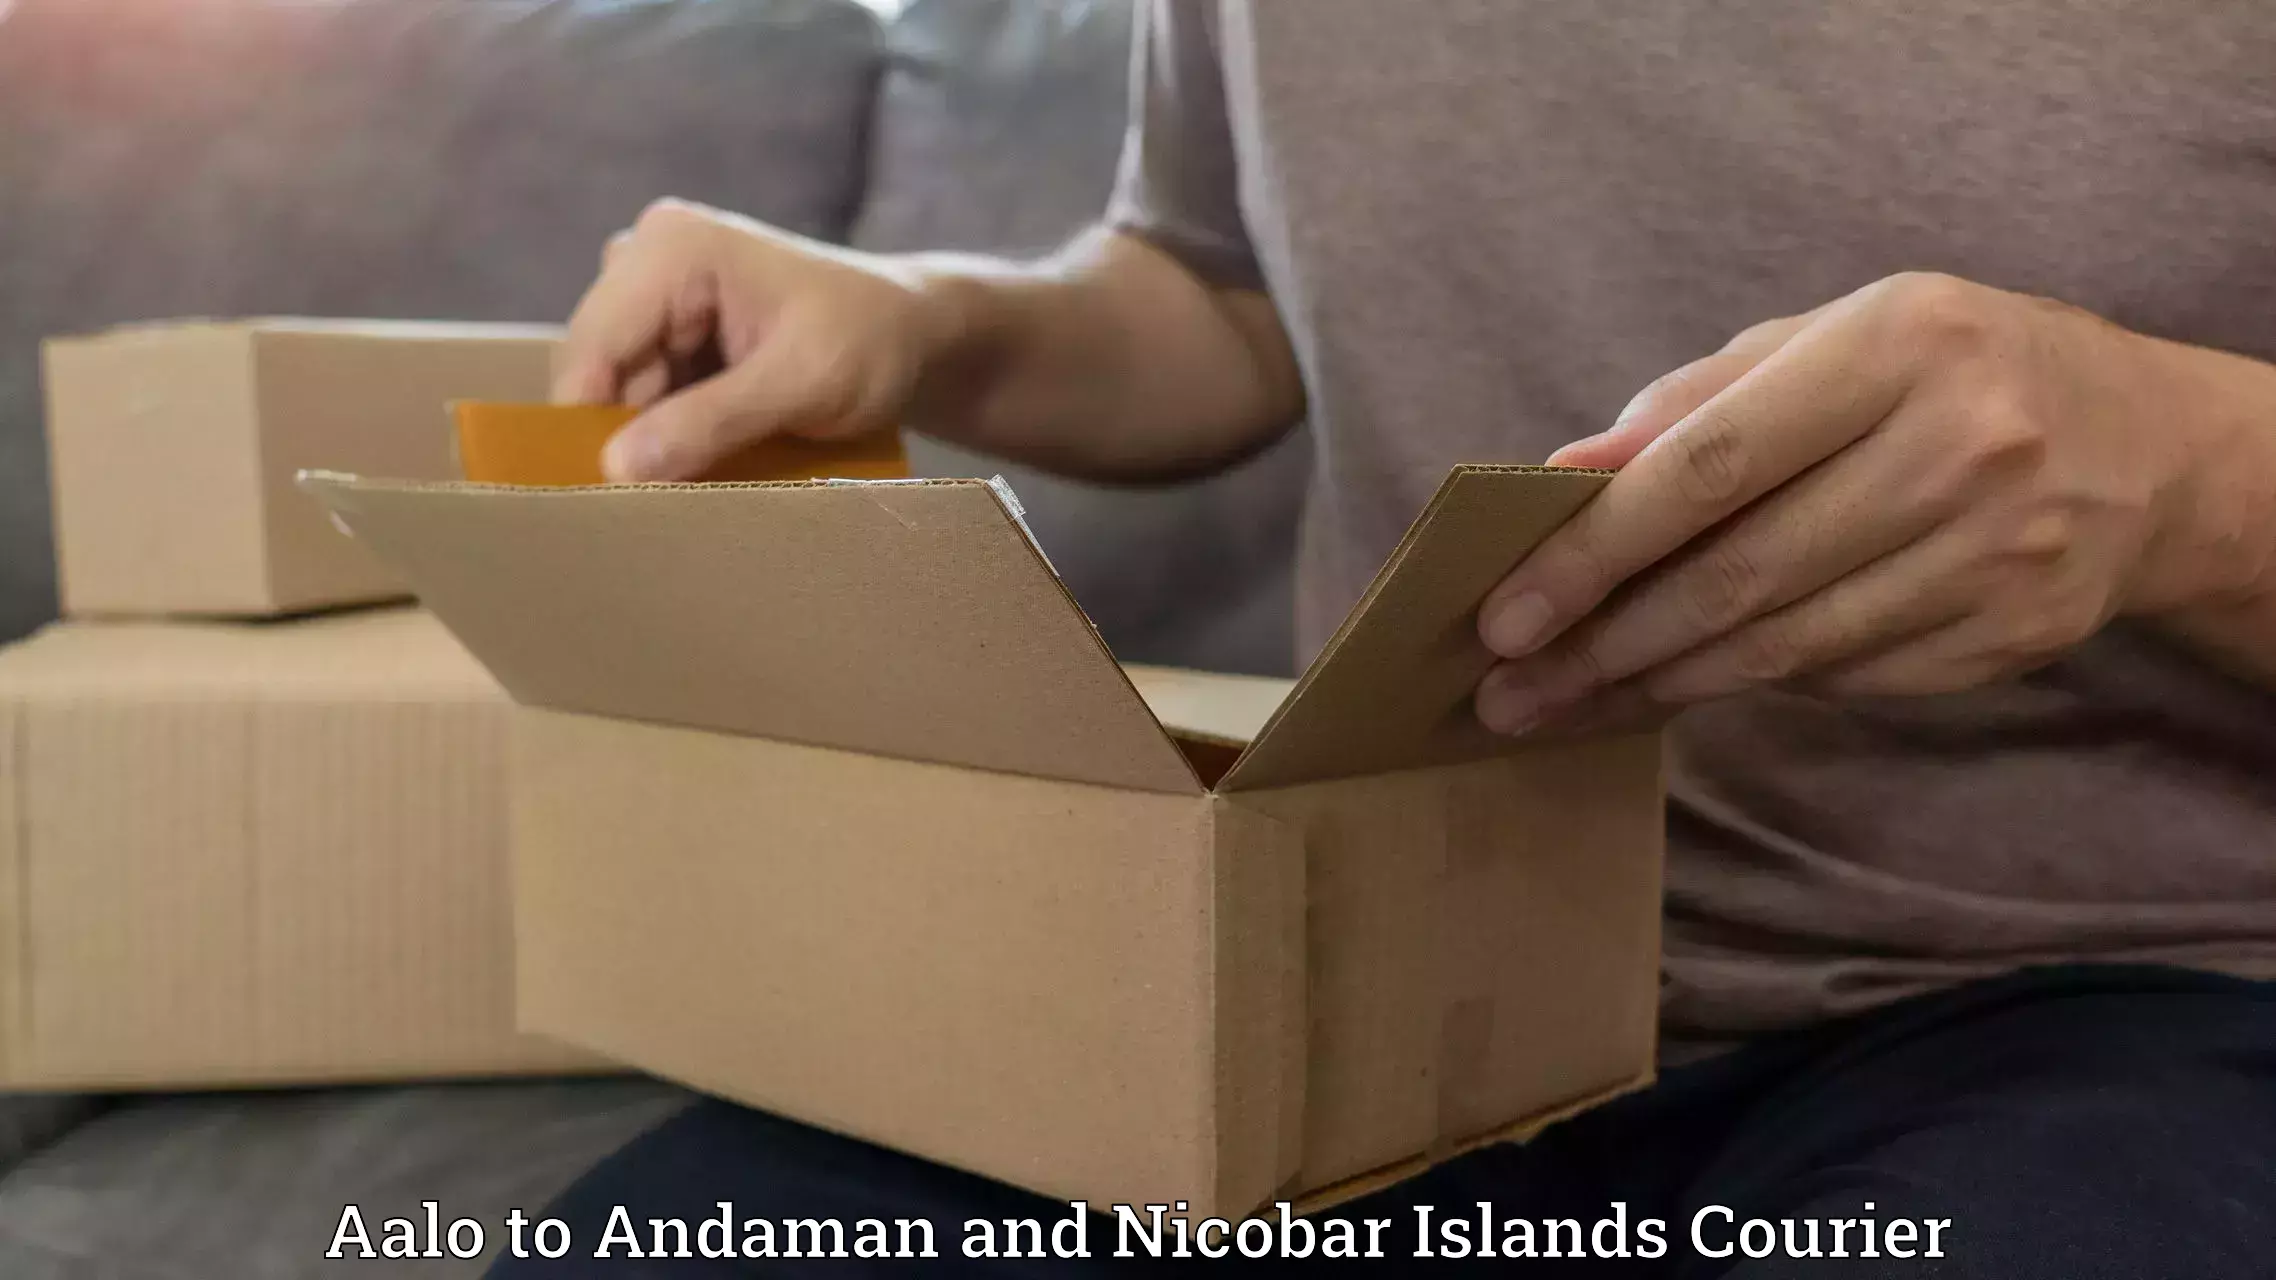 Reliable courier service Aalo to Andaman and Nicobar Islands